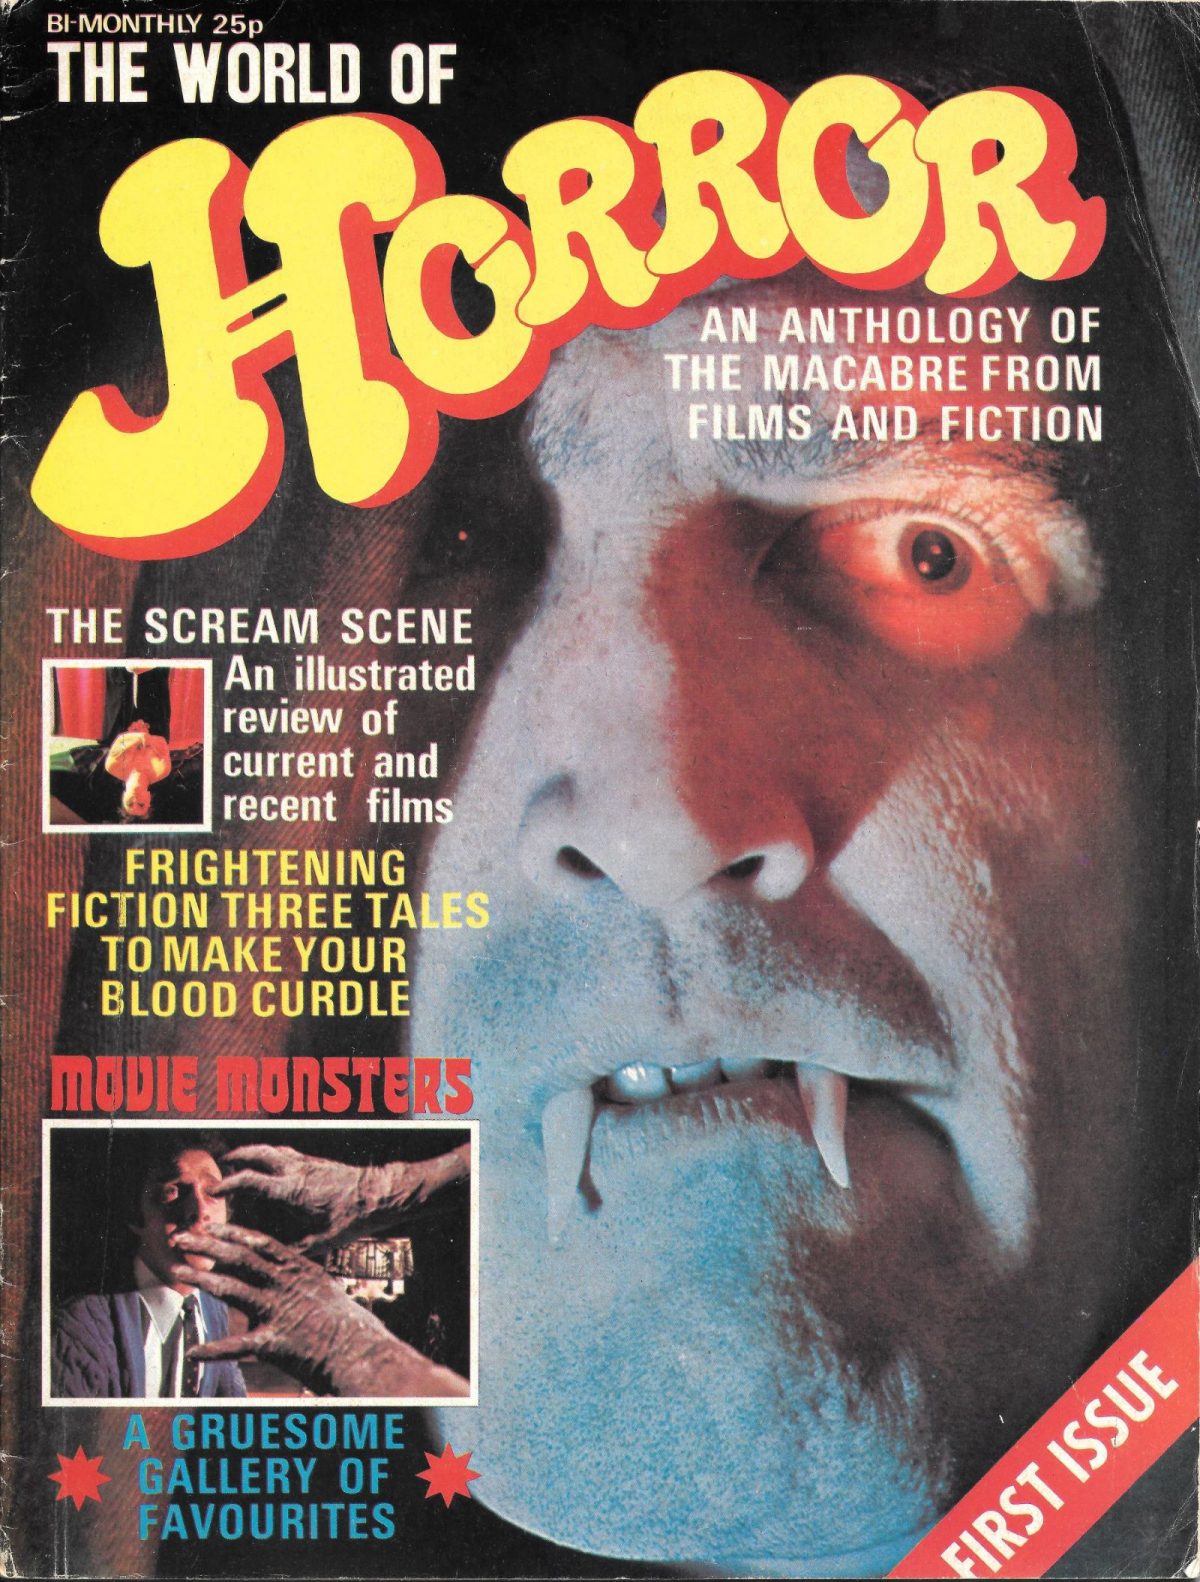 World of Horror, magazines, 1970s, horror movies, Peter Cushing, Christopher Lee, Vincent Price, cult, occult